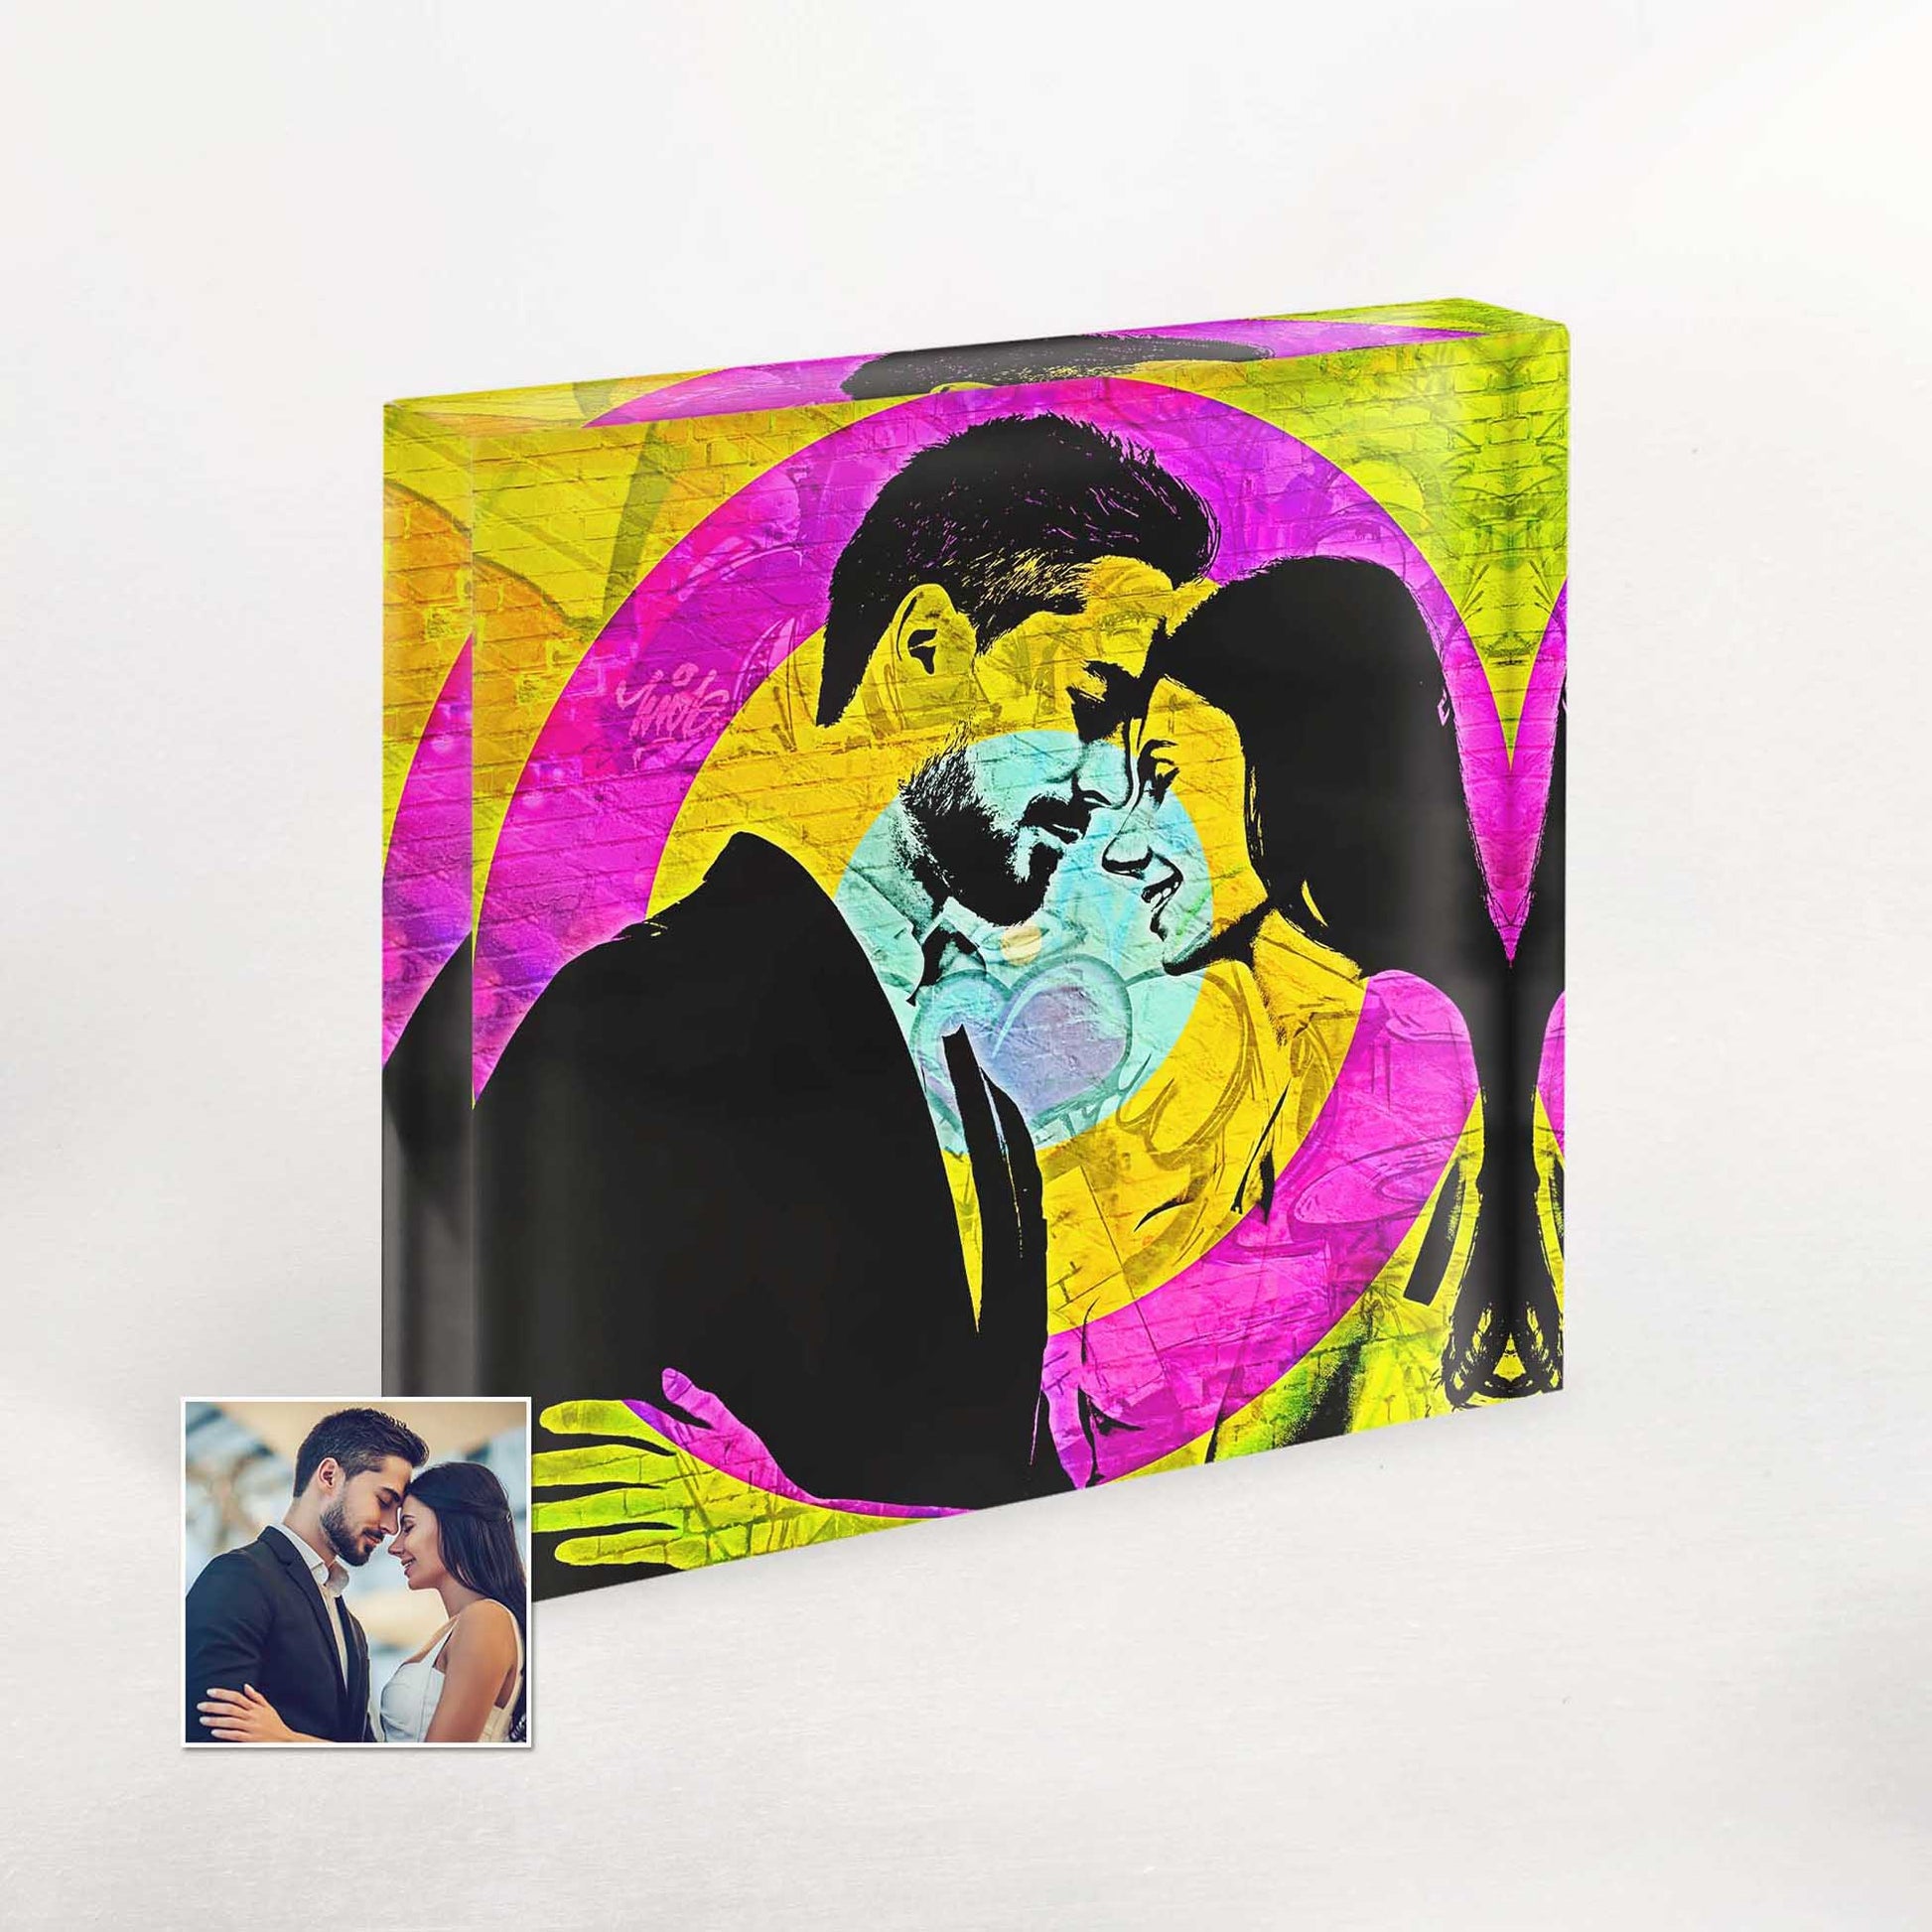 Experience the urban charm with the Personalised Graffiti Street Art Acrylic Block Photo. Its cool and fresh design captures the essence of street art, offering a novelty gift idea for couples' anniversaries